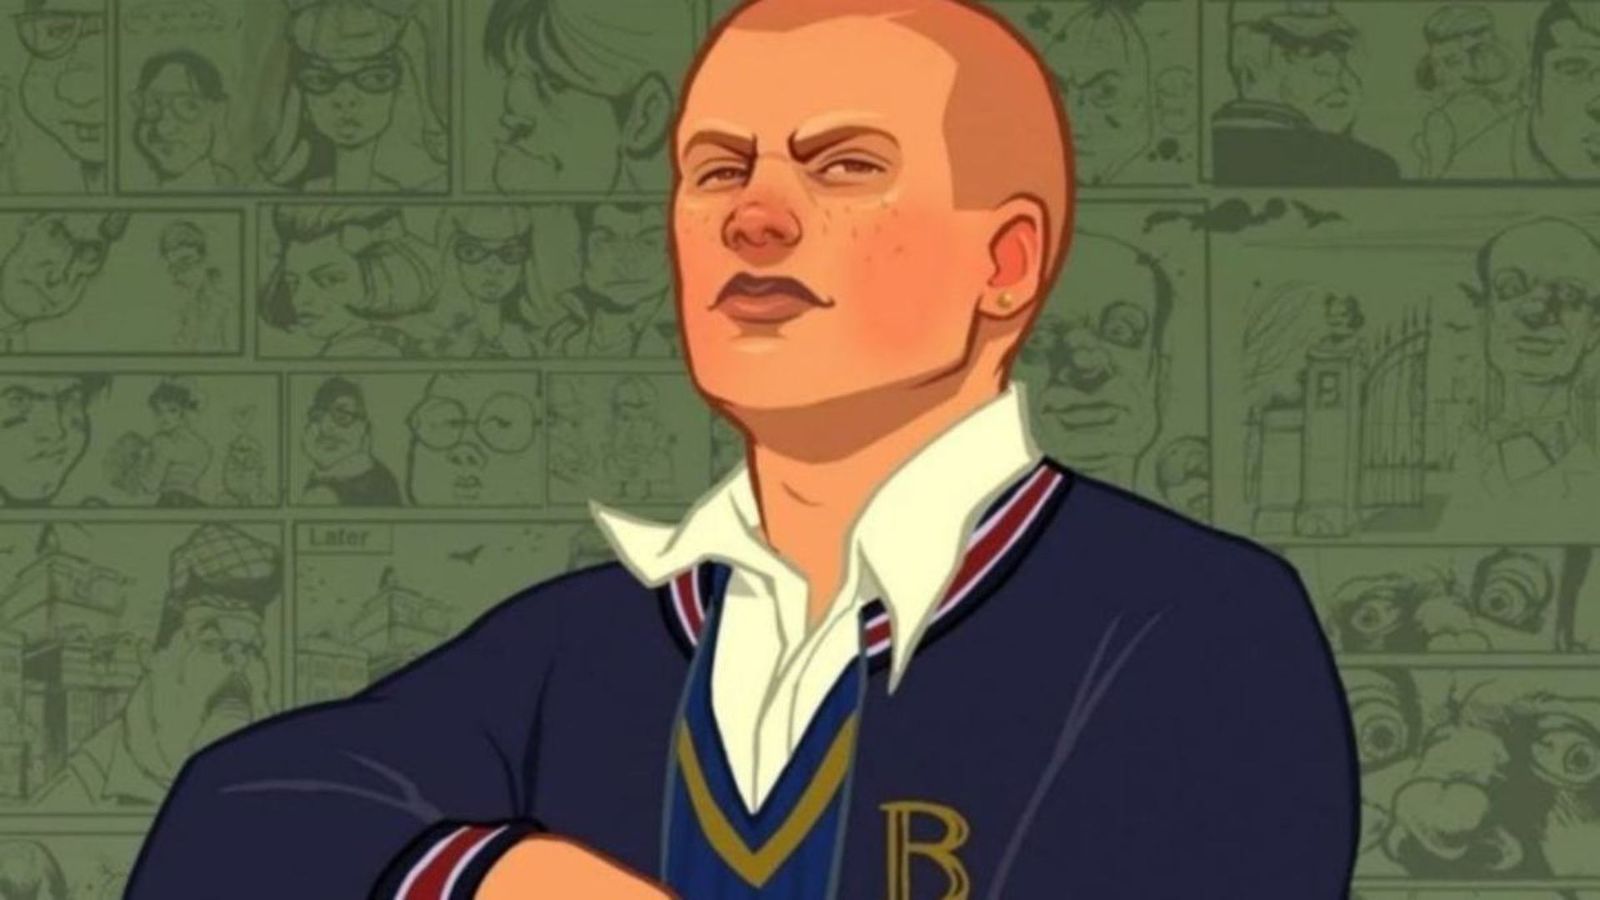 The cover art of Bully